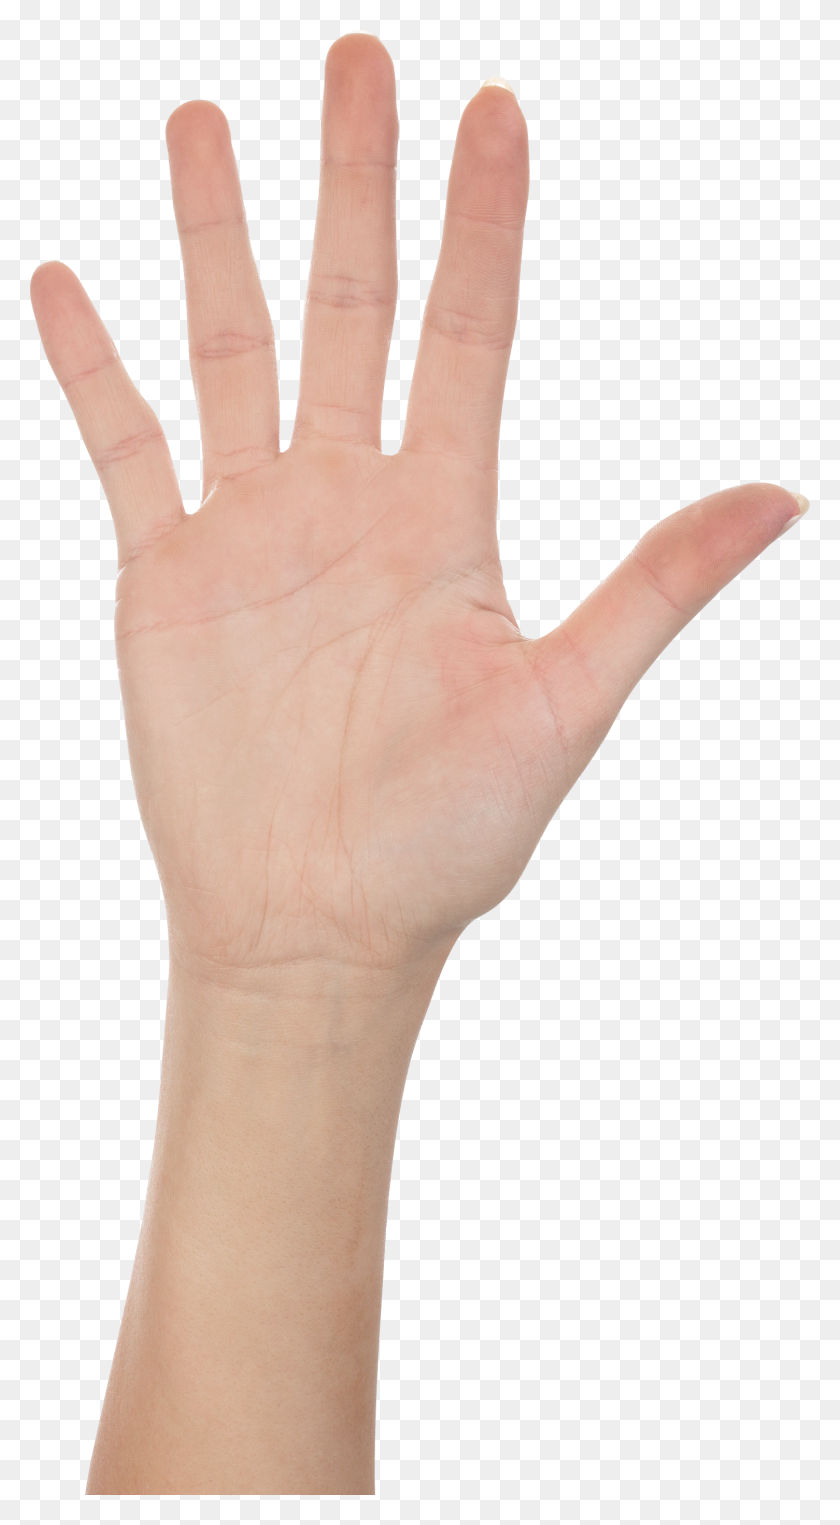 1505x2827 Hands Png Free Images, Pictures Download, Hand - Raised Hands PNG